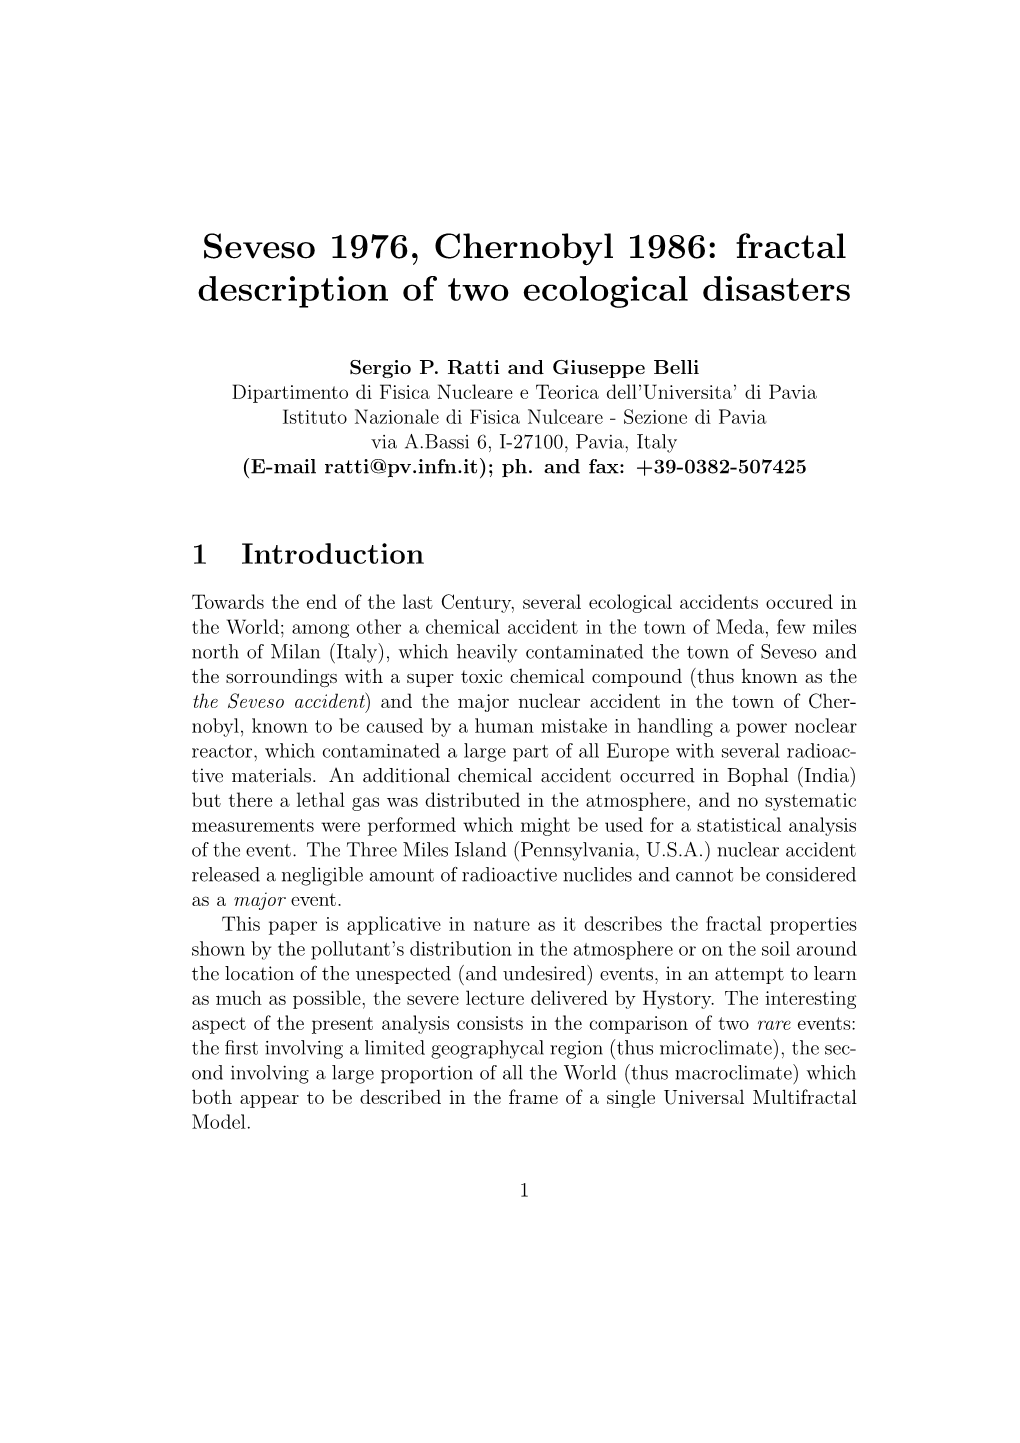 Seveso 1976, Chernobyl 1986: Fractal Description of Two Ecological Disasters